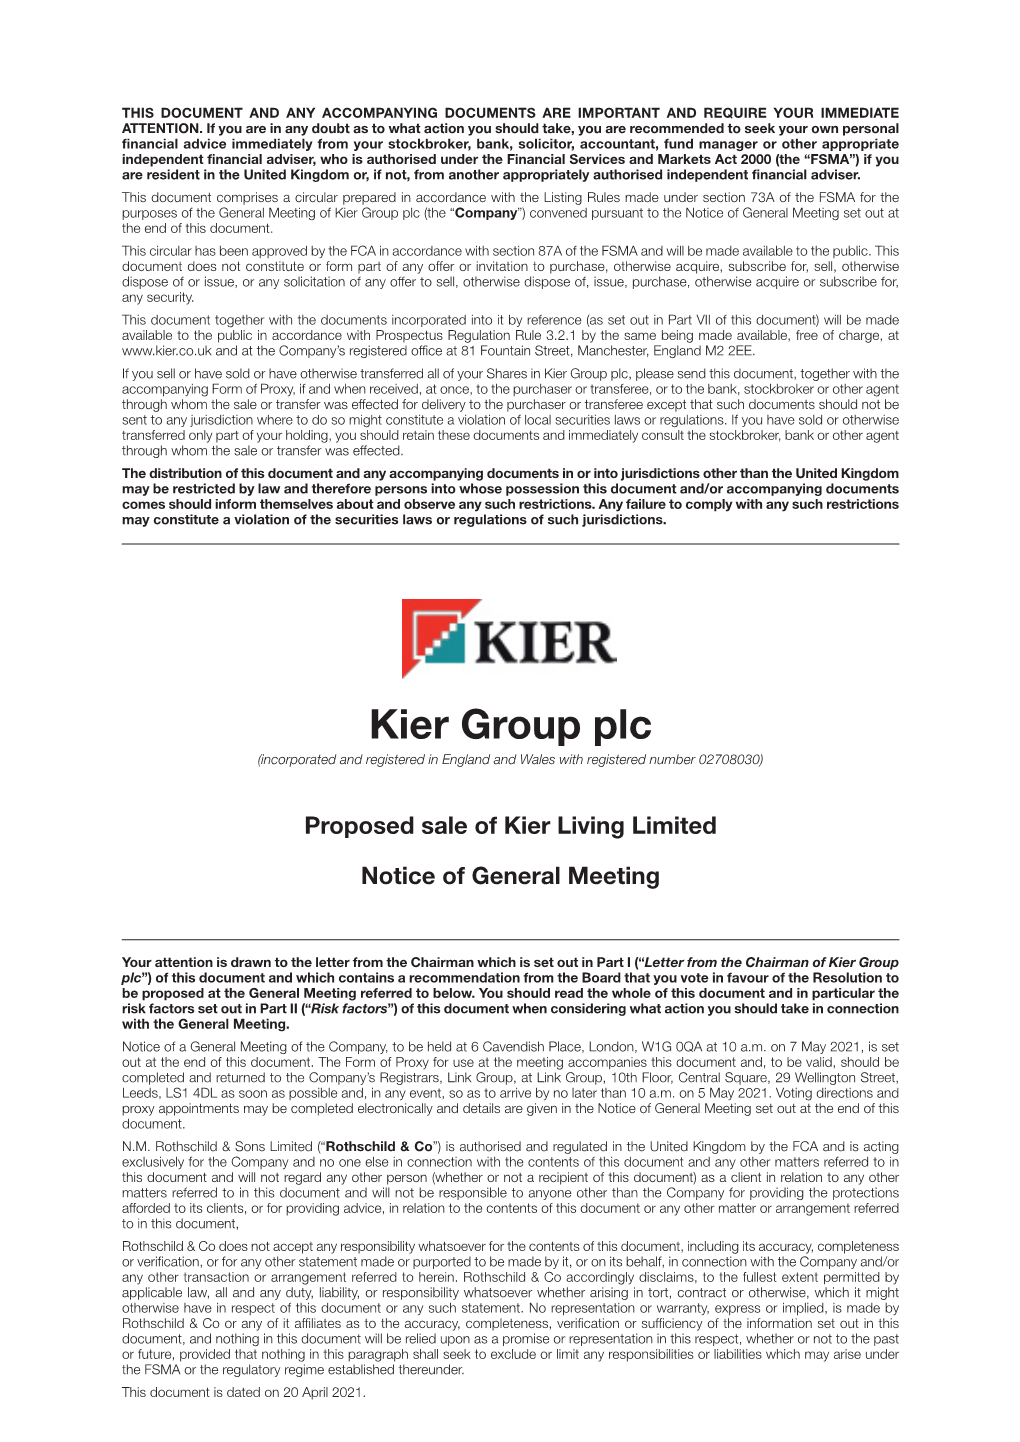 Kier Group Plc (The “Company”) Convened Pursuant to the Notice of General Meeting Set out at the End of This Document